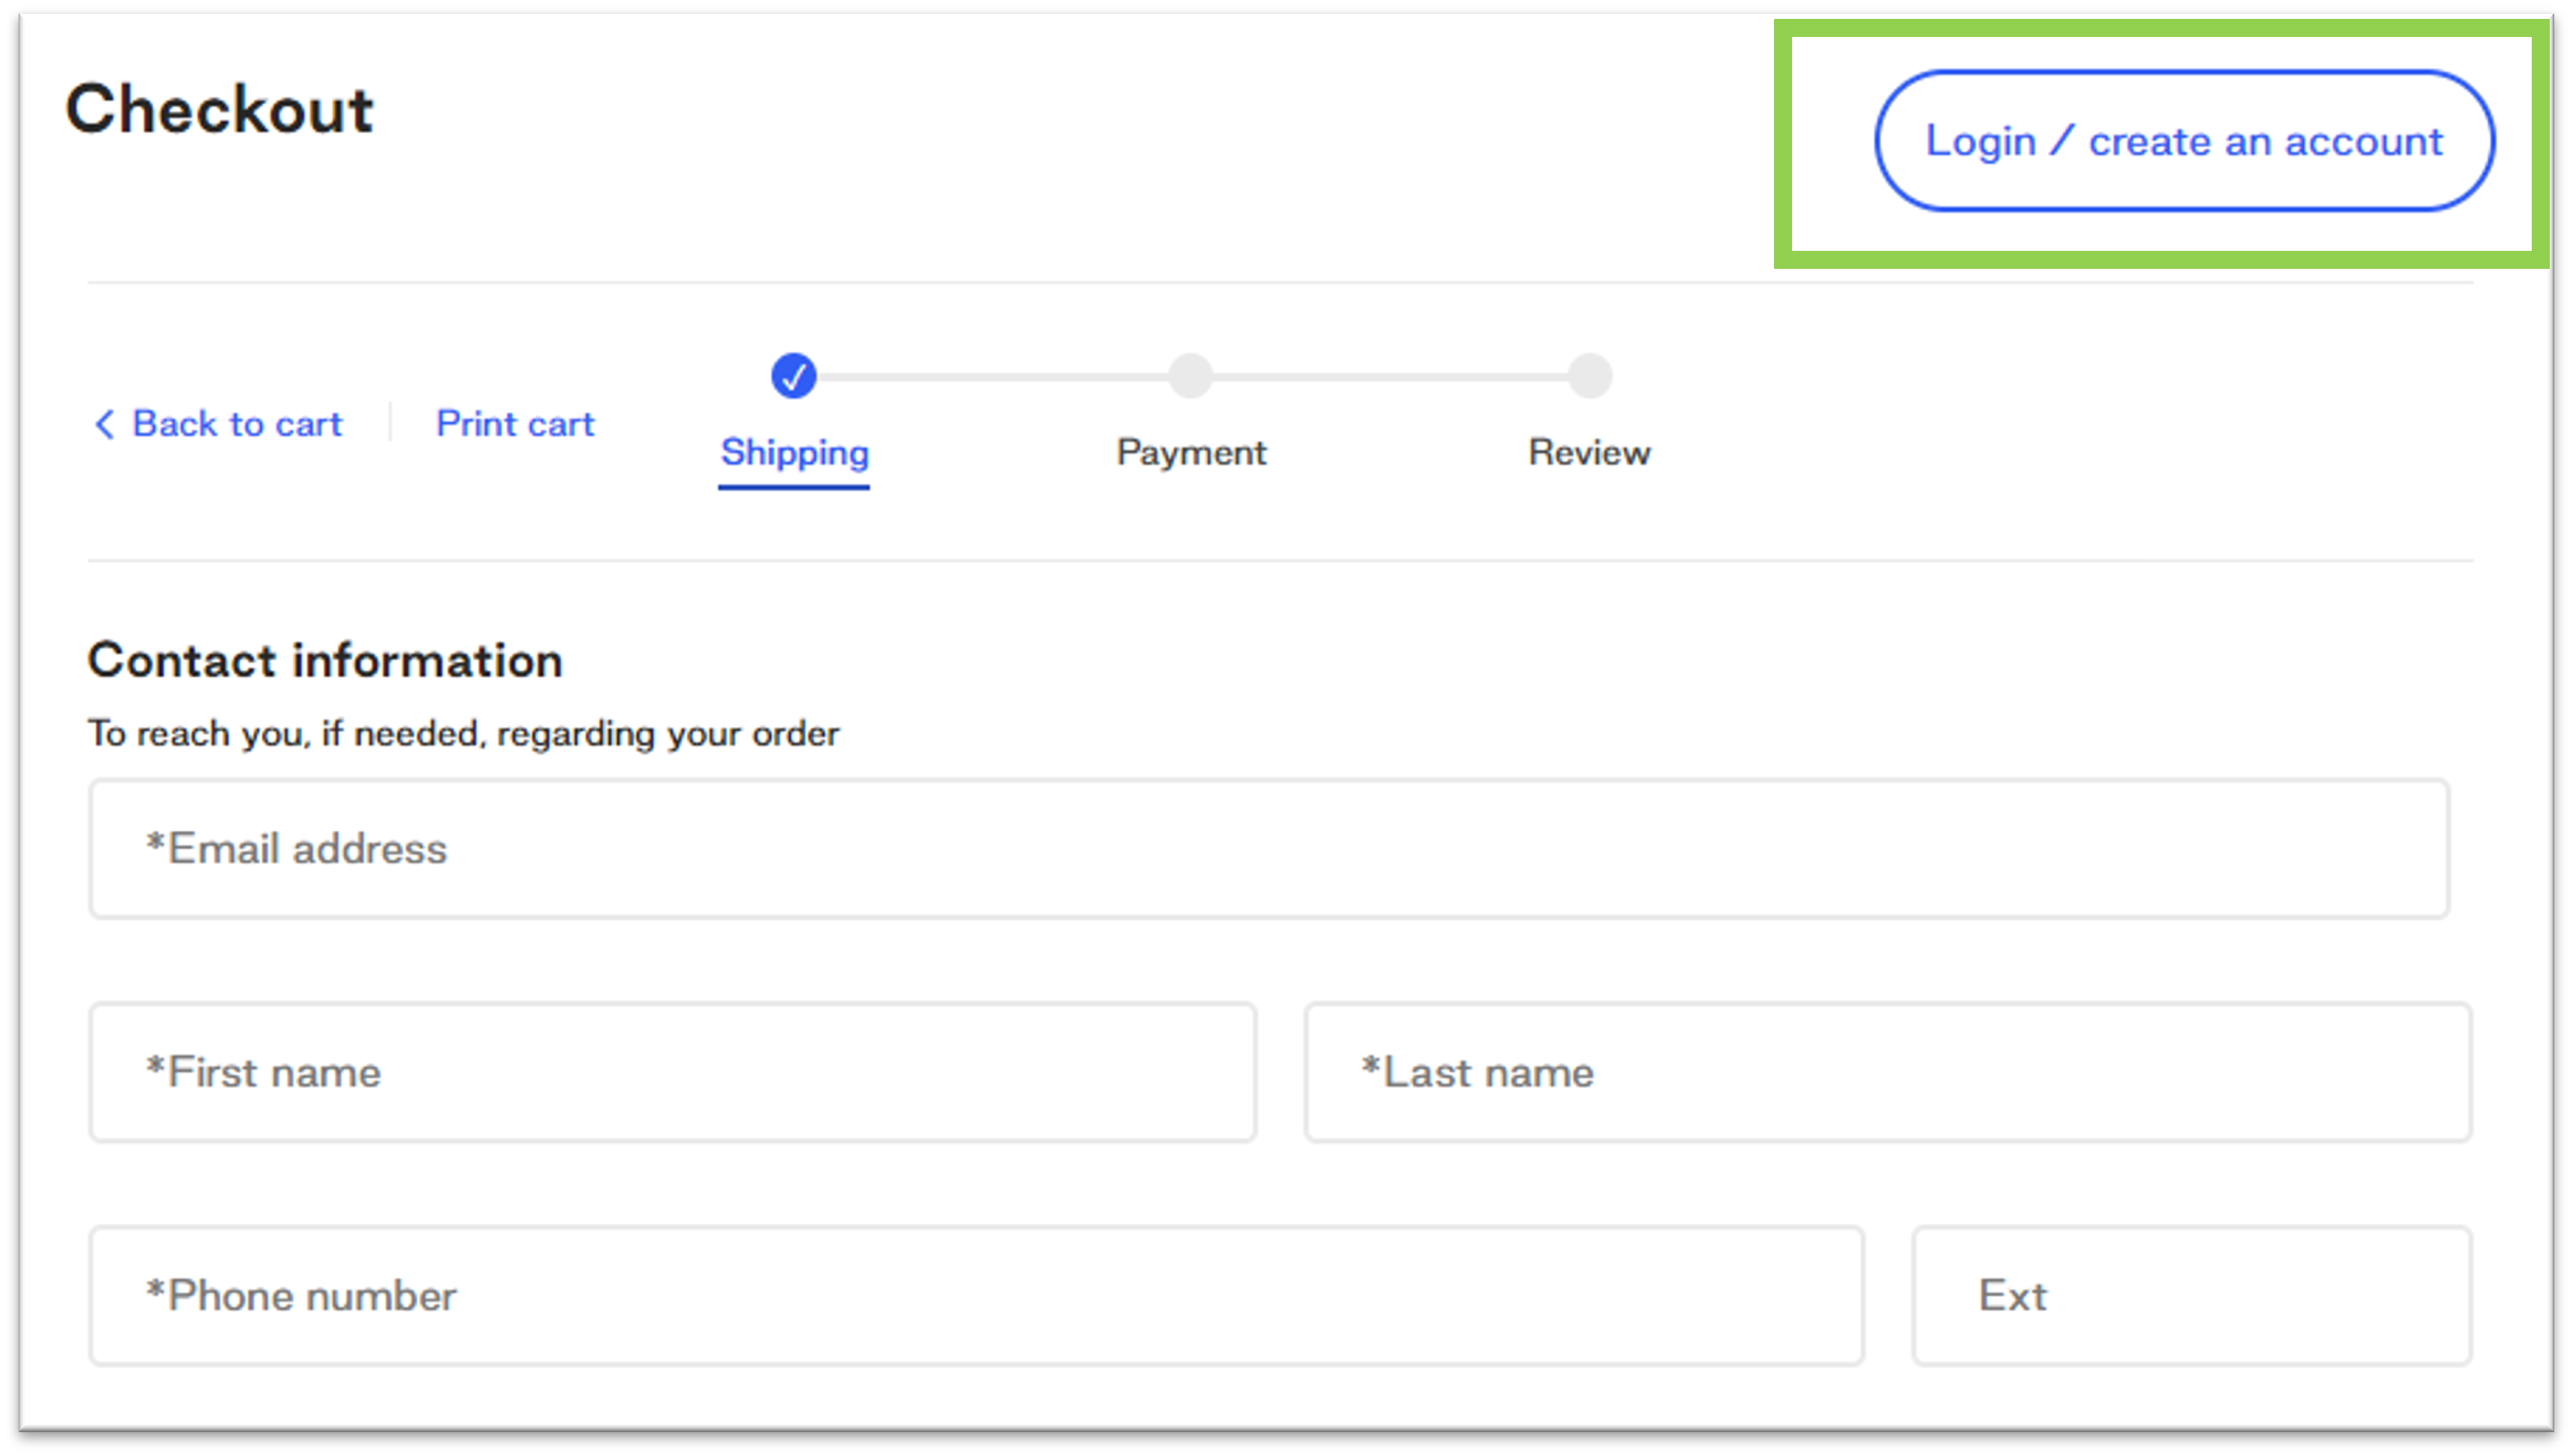 Screenshots of Quill checkout. Quill takes users into a natural step of entering shipping and billing information to continue the checkout process.